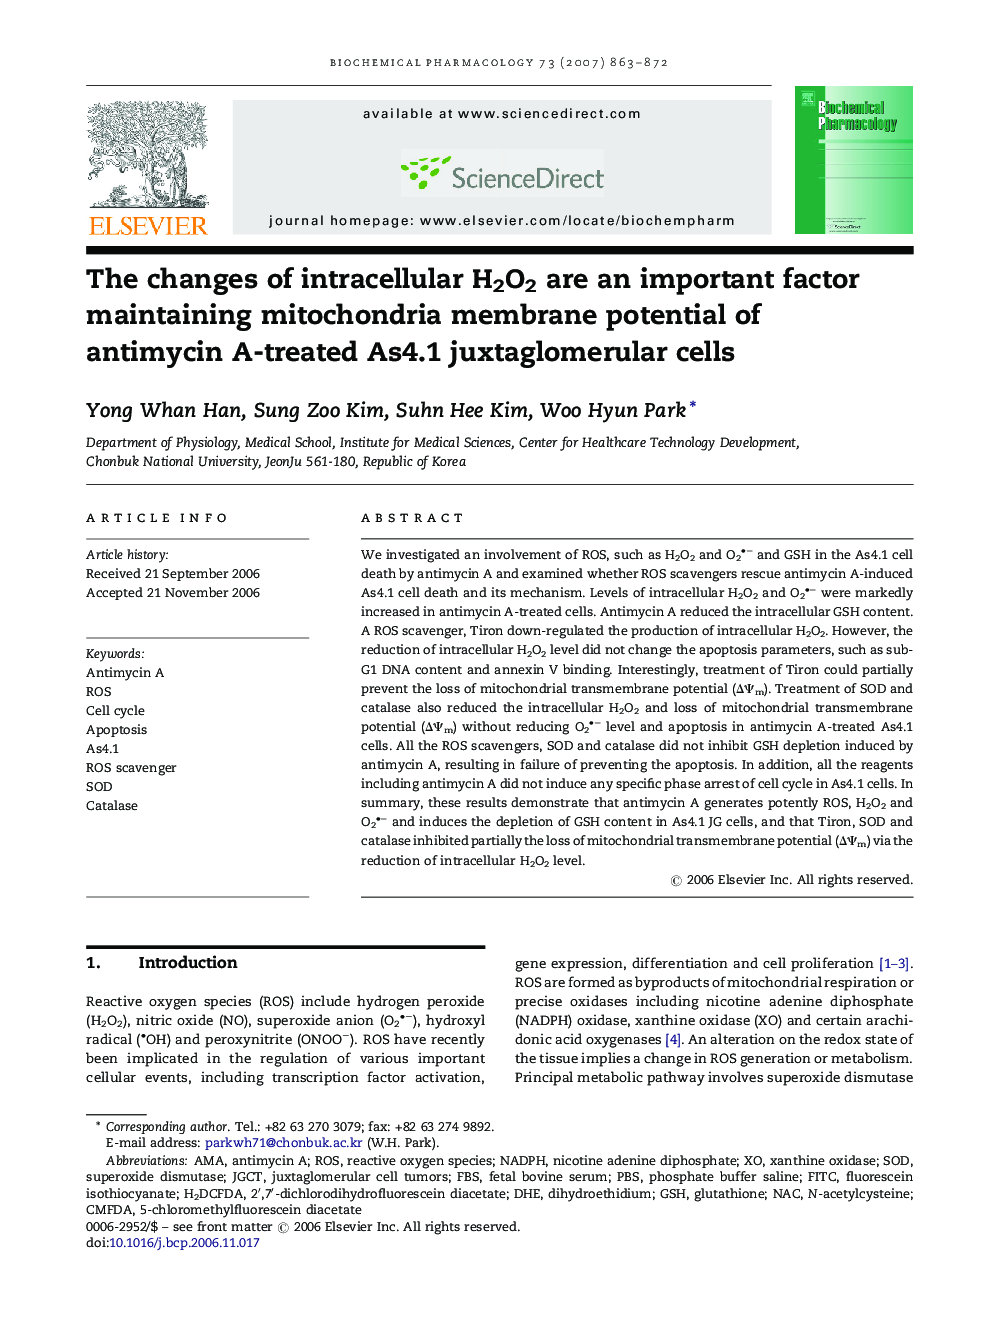 The changes of intracellular H2O2 are an important factor maintaining mitochondria membrane potential of antimycin A-treated As4.1 juxtaglomerular cells